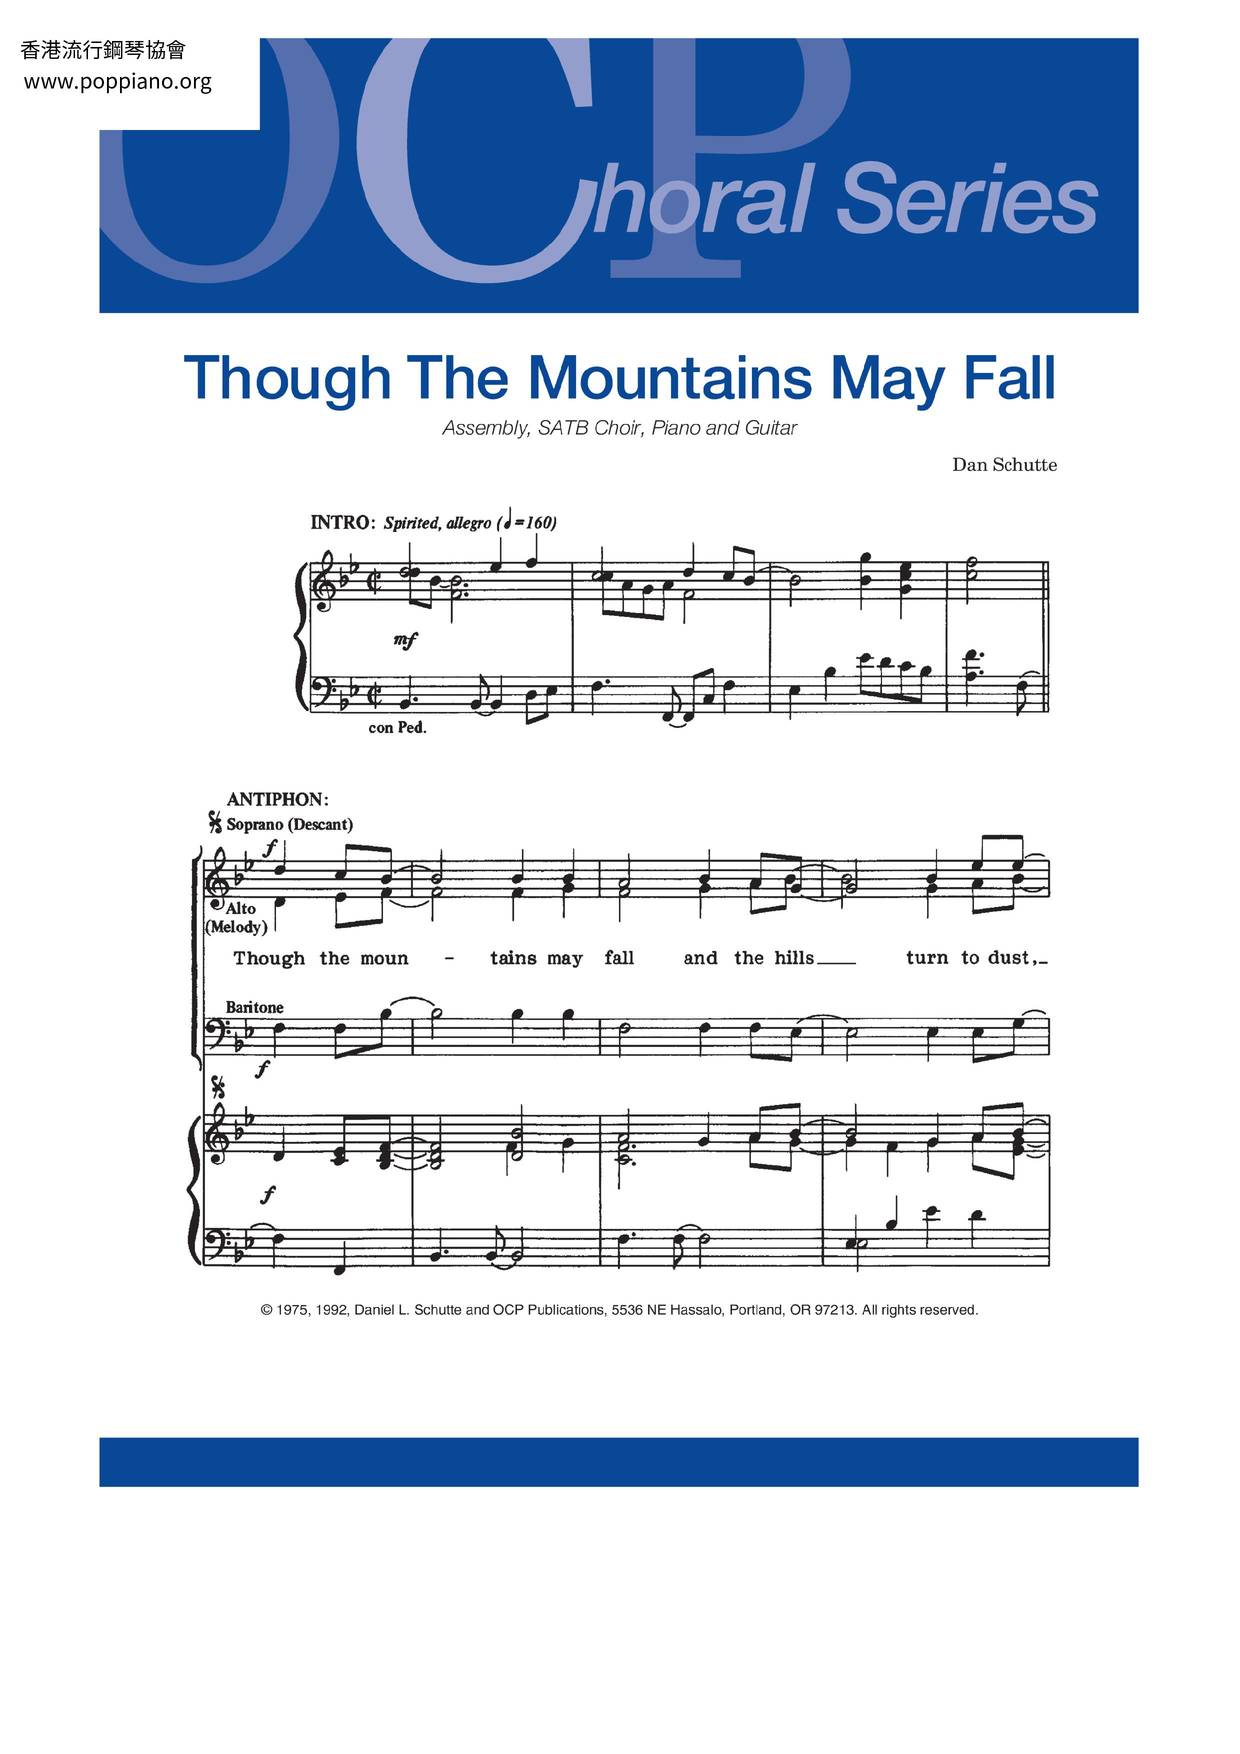 Though The Mountains May Fall Score